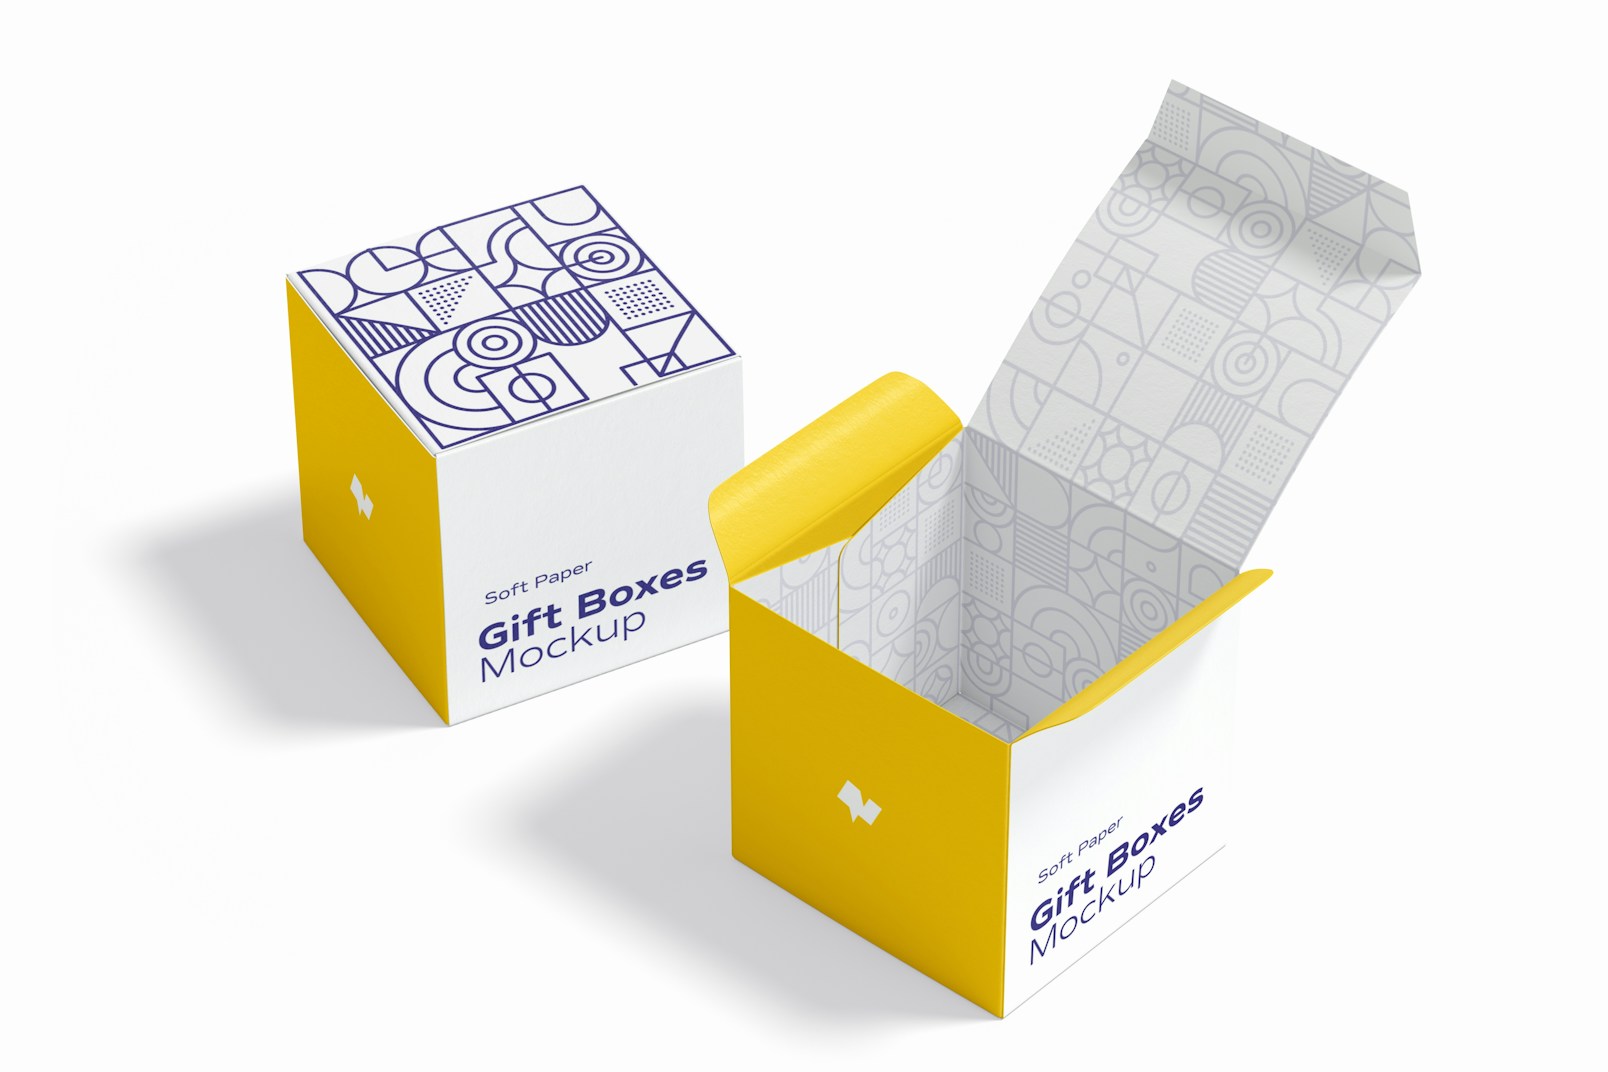 Soft Paper Gift Boxes Mockup